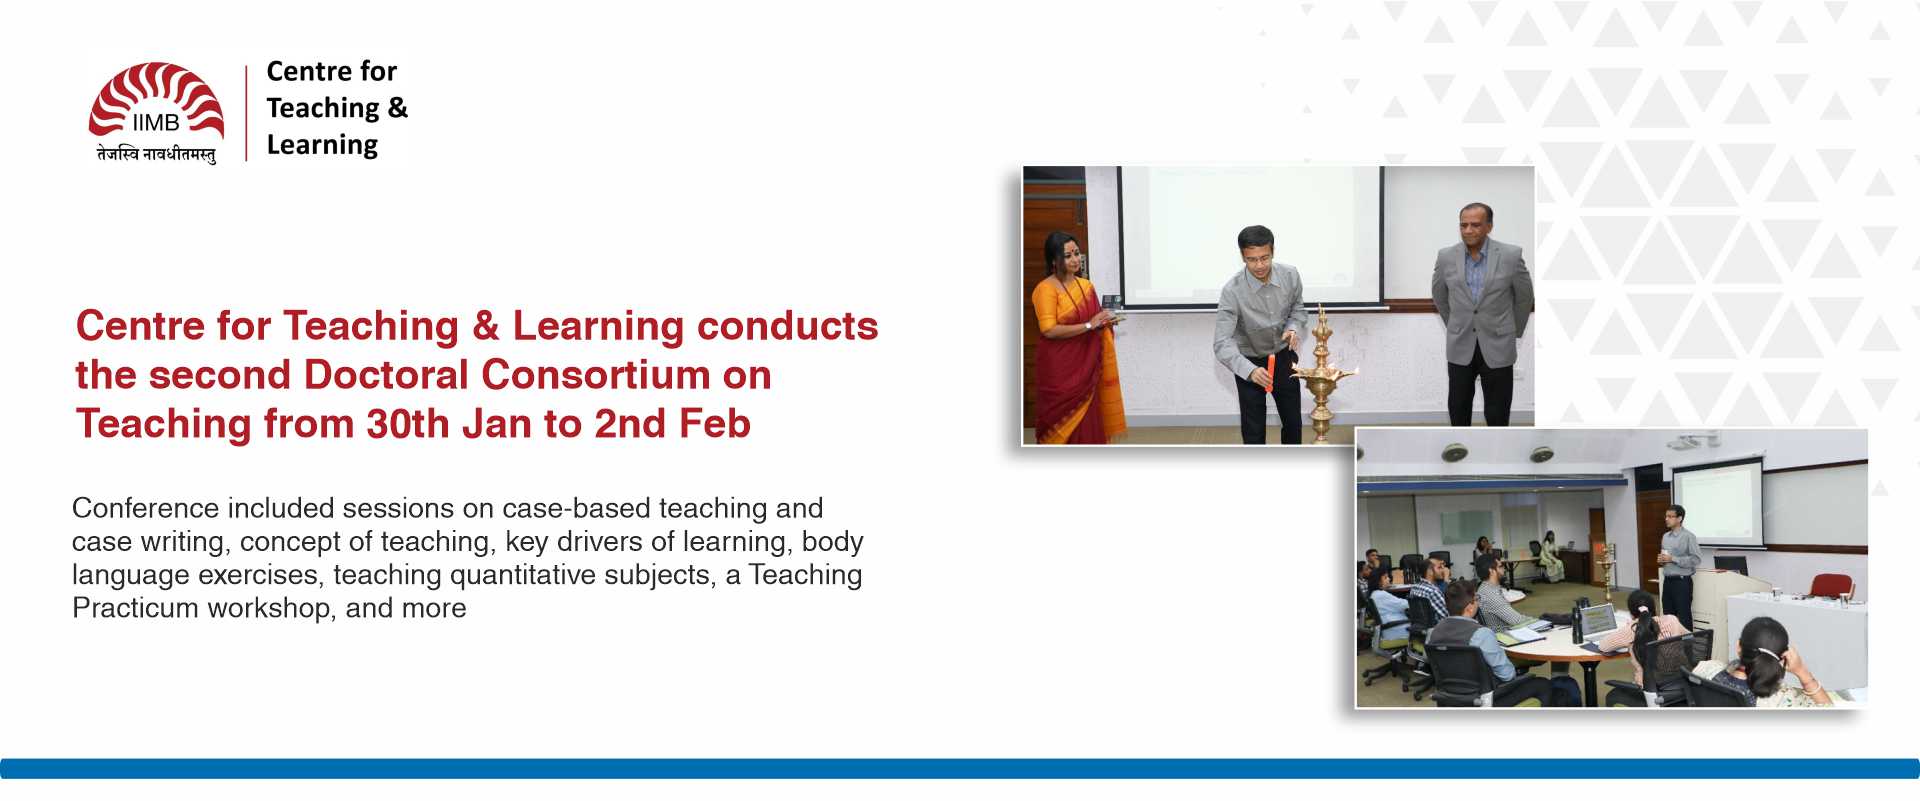 Centre for Teaching & Learning conducts the second Doctoral Consortium on Teaching from 30th Jan to 2nd Feb